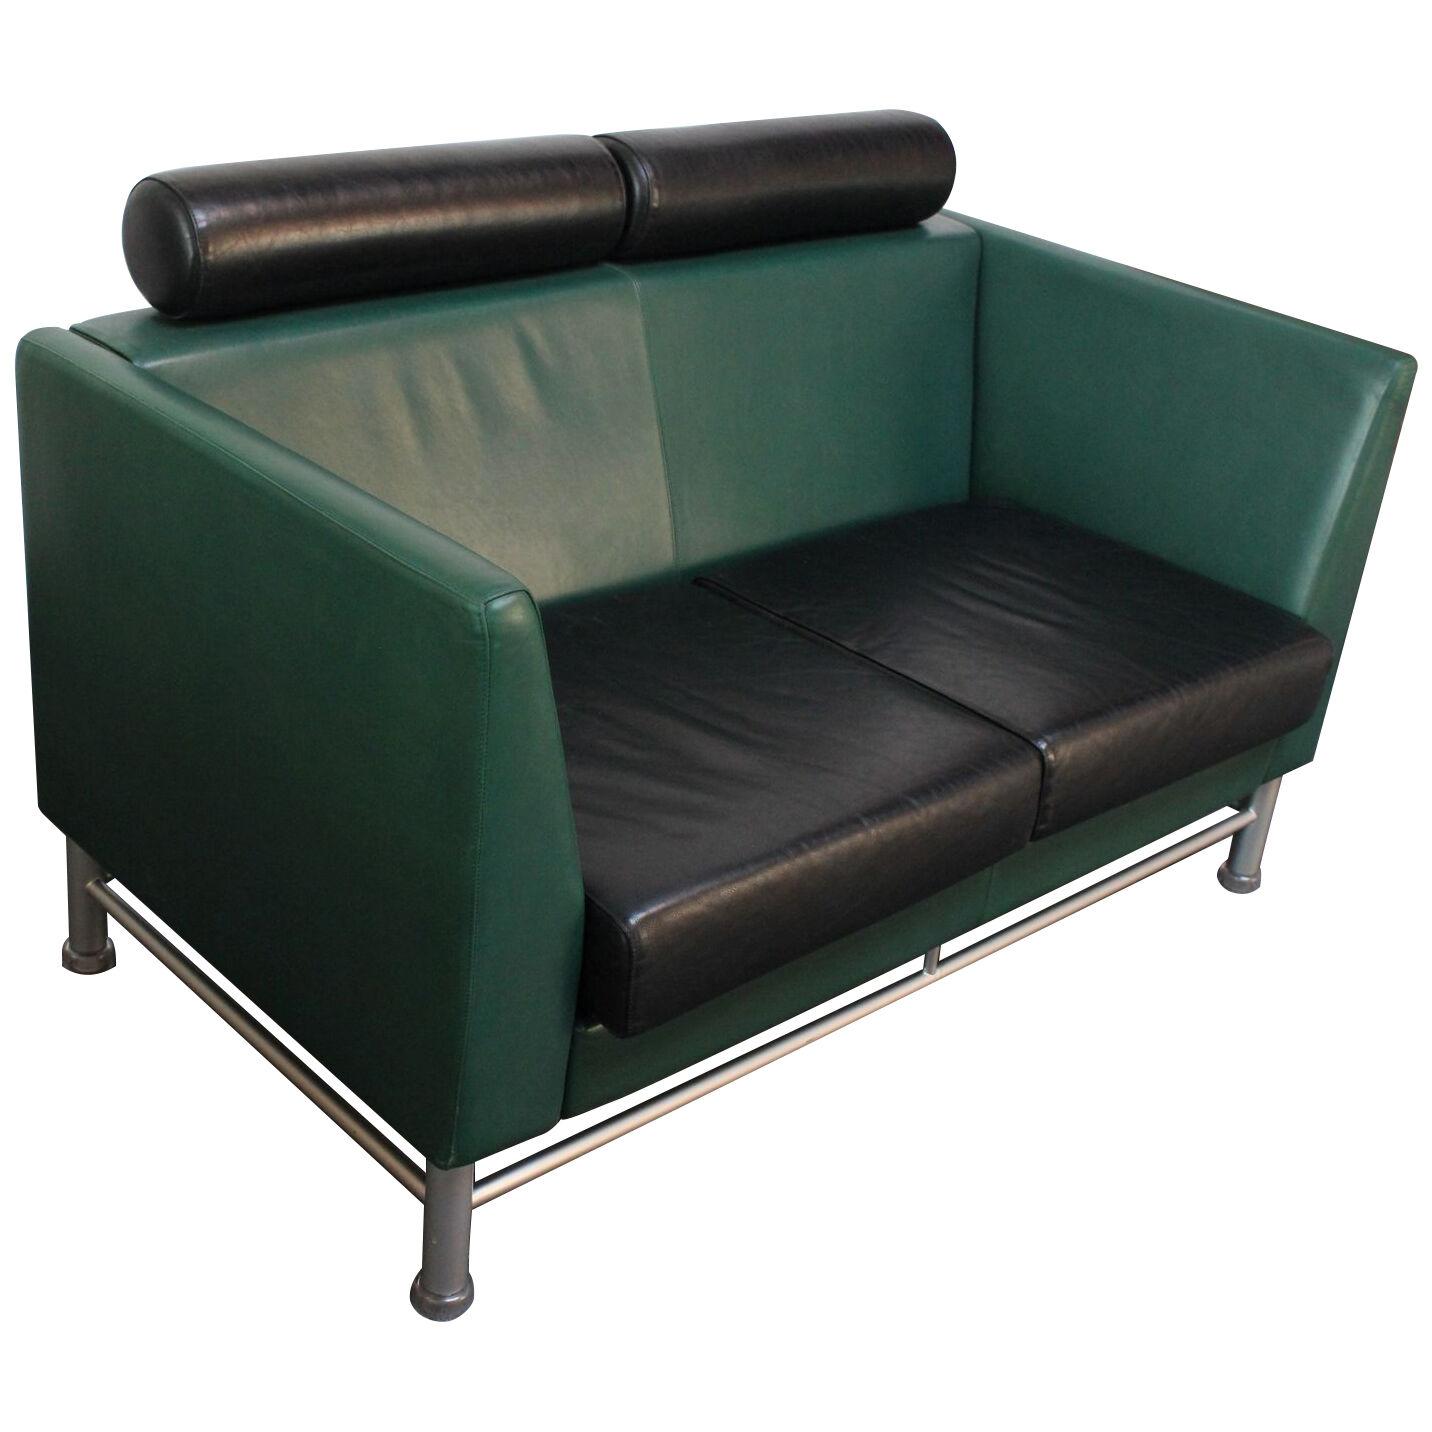 Postmodern Leather "East Side" Sofa Designed by Ettore Sottsass for Knoll